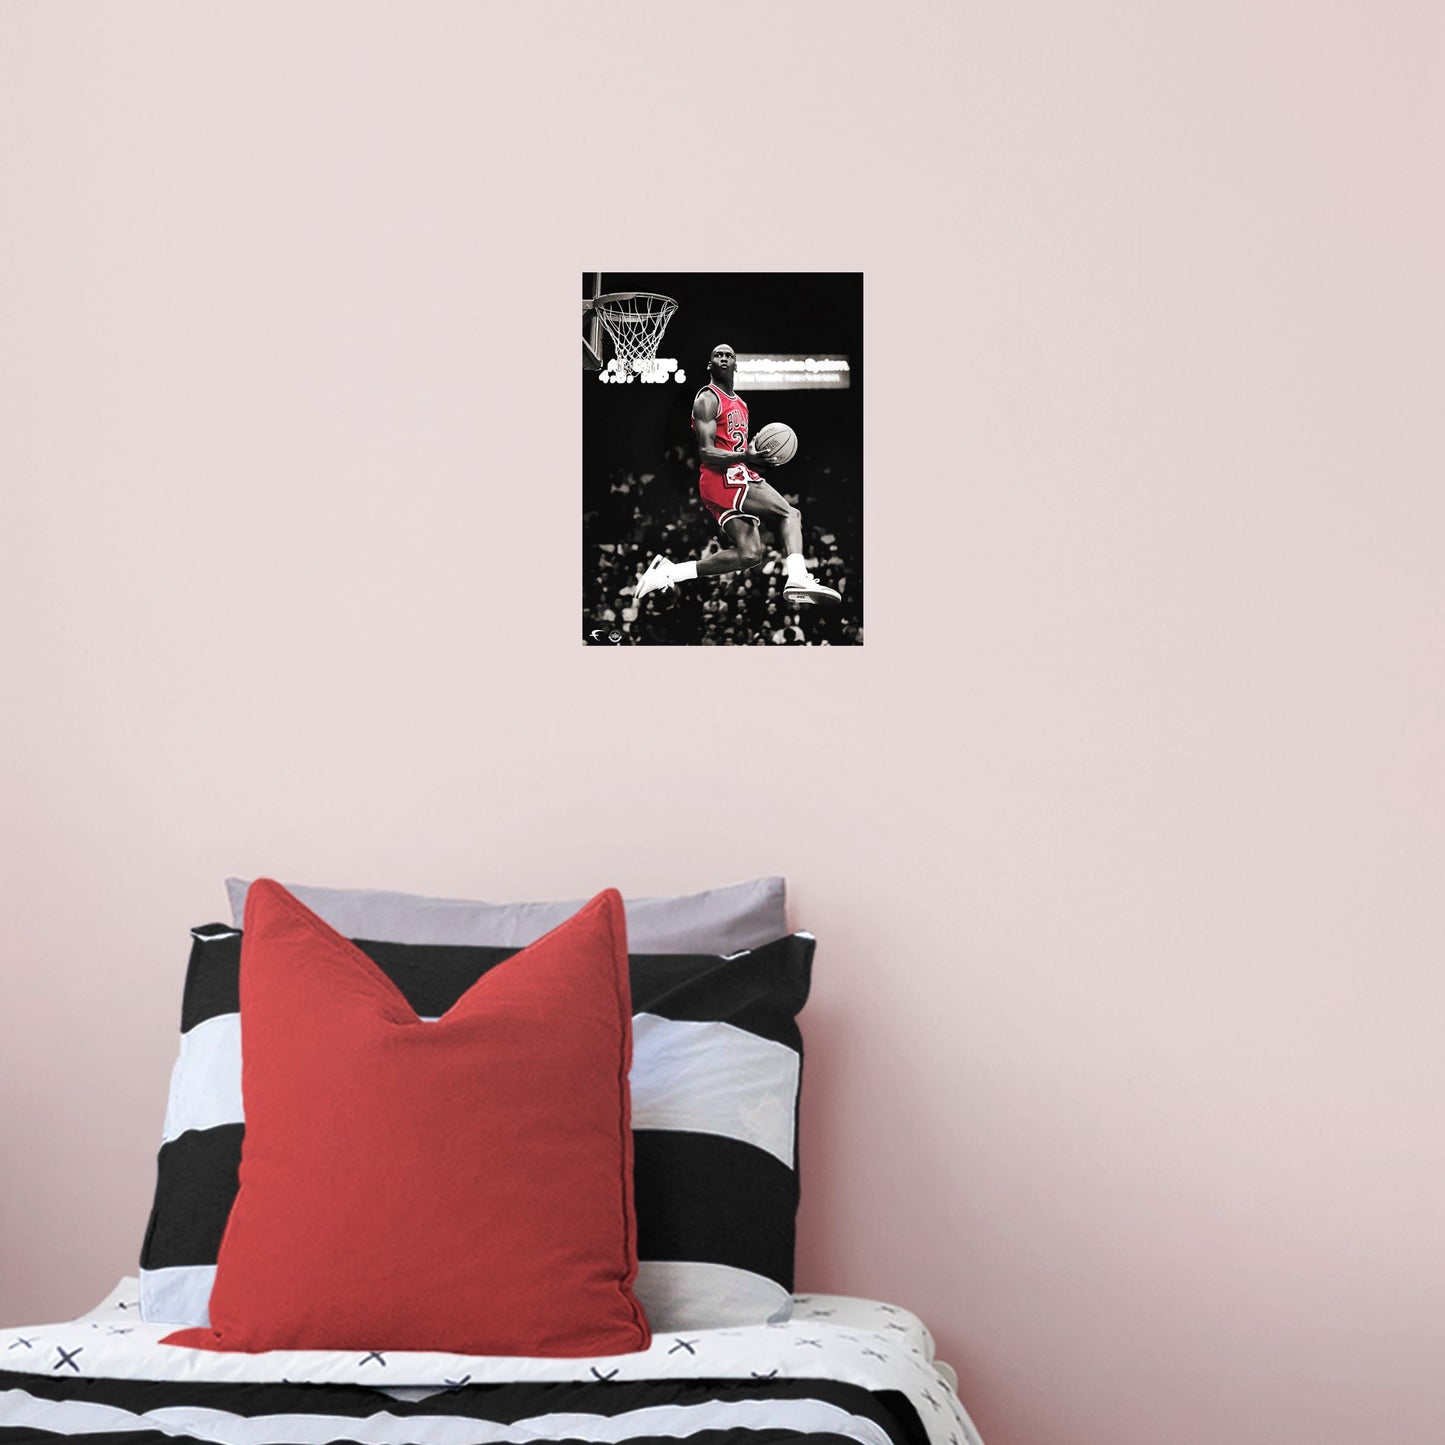 Chicago Bulls: Michael Jordan Air Poster - Officially Licensed NBA Removable Adhesive Decal